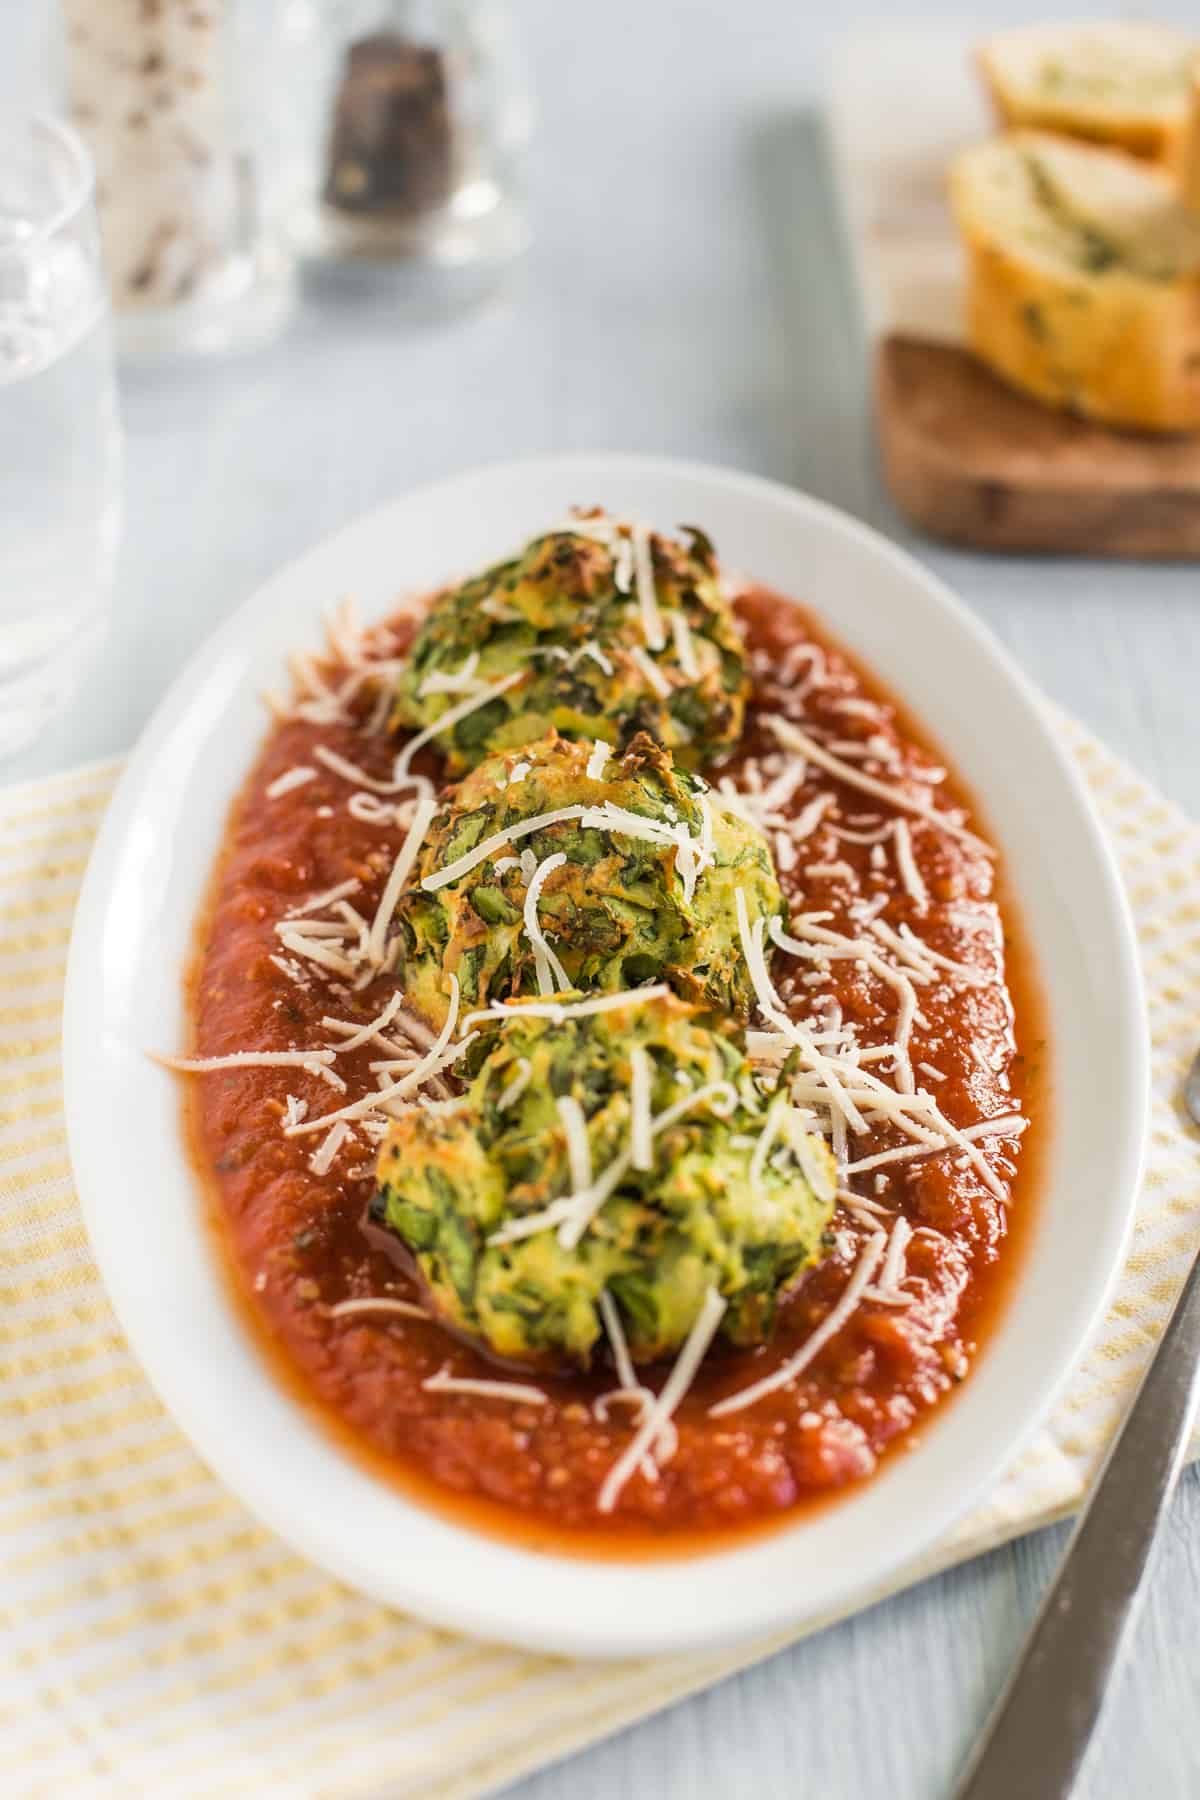 Portion of spinach and ricotta dumplings on a plate with tomato sauce and cheese